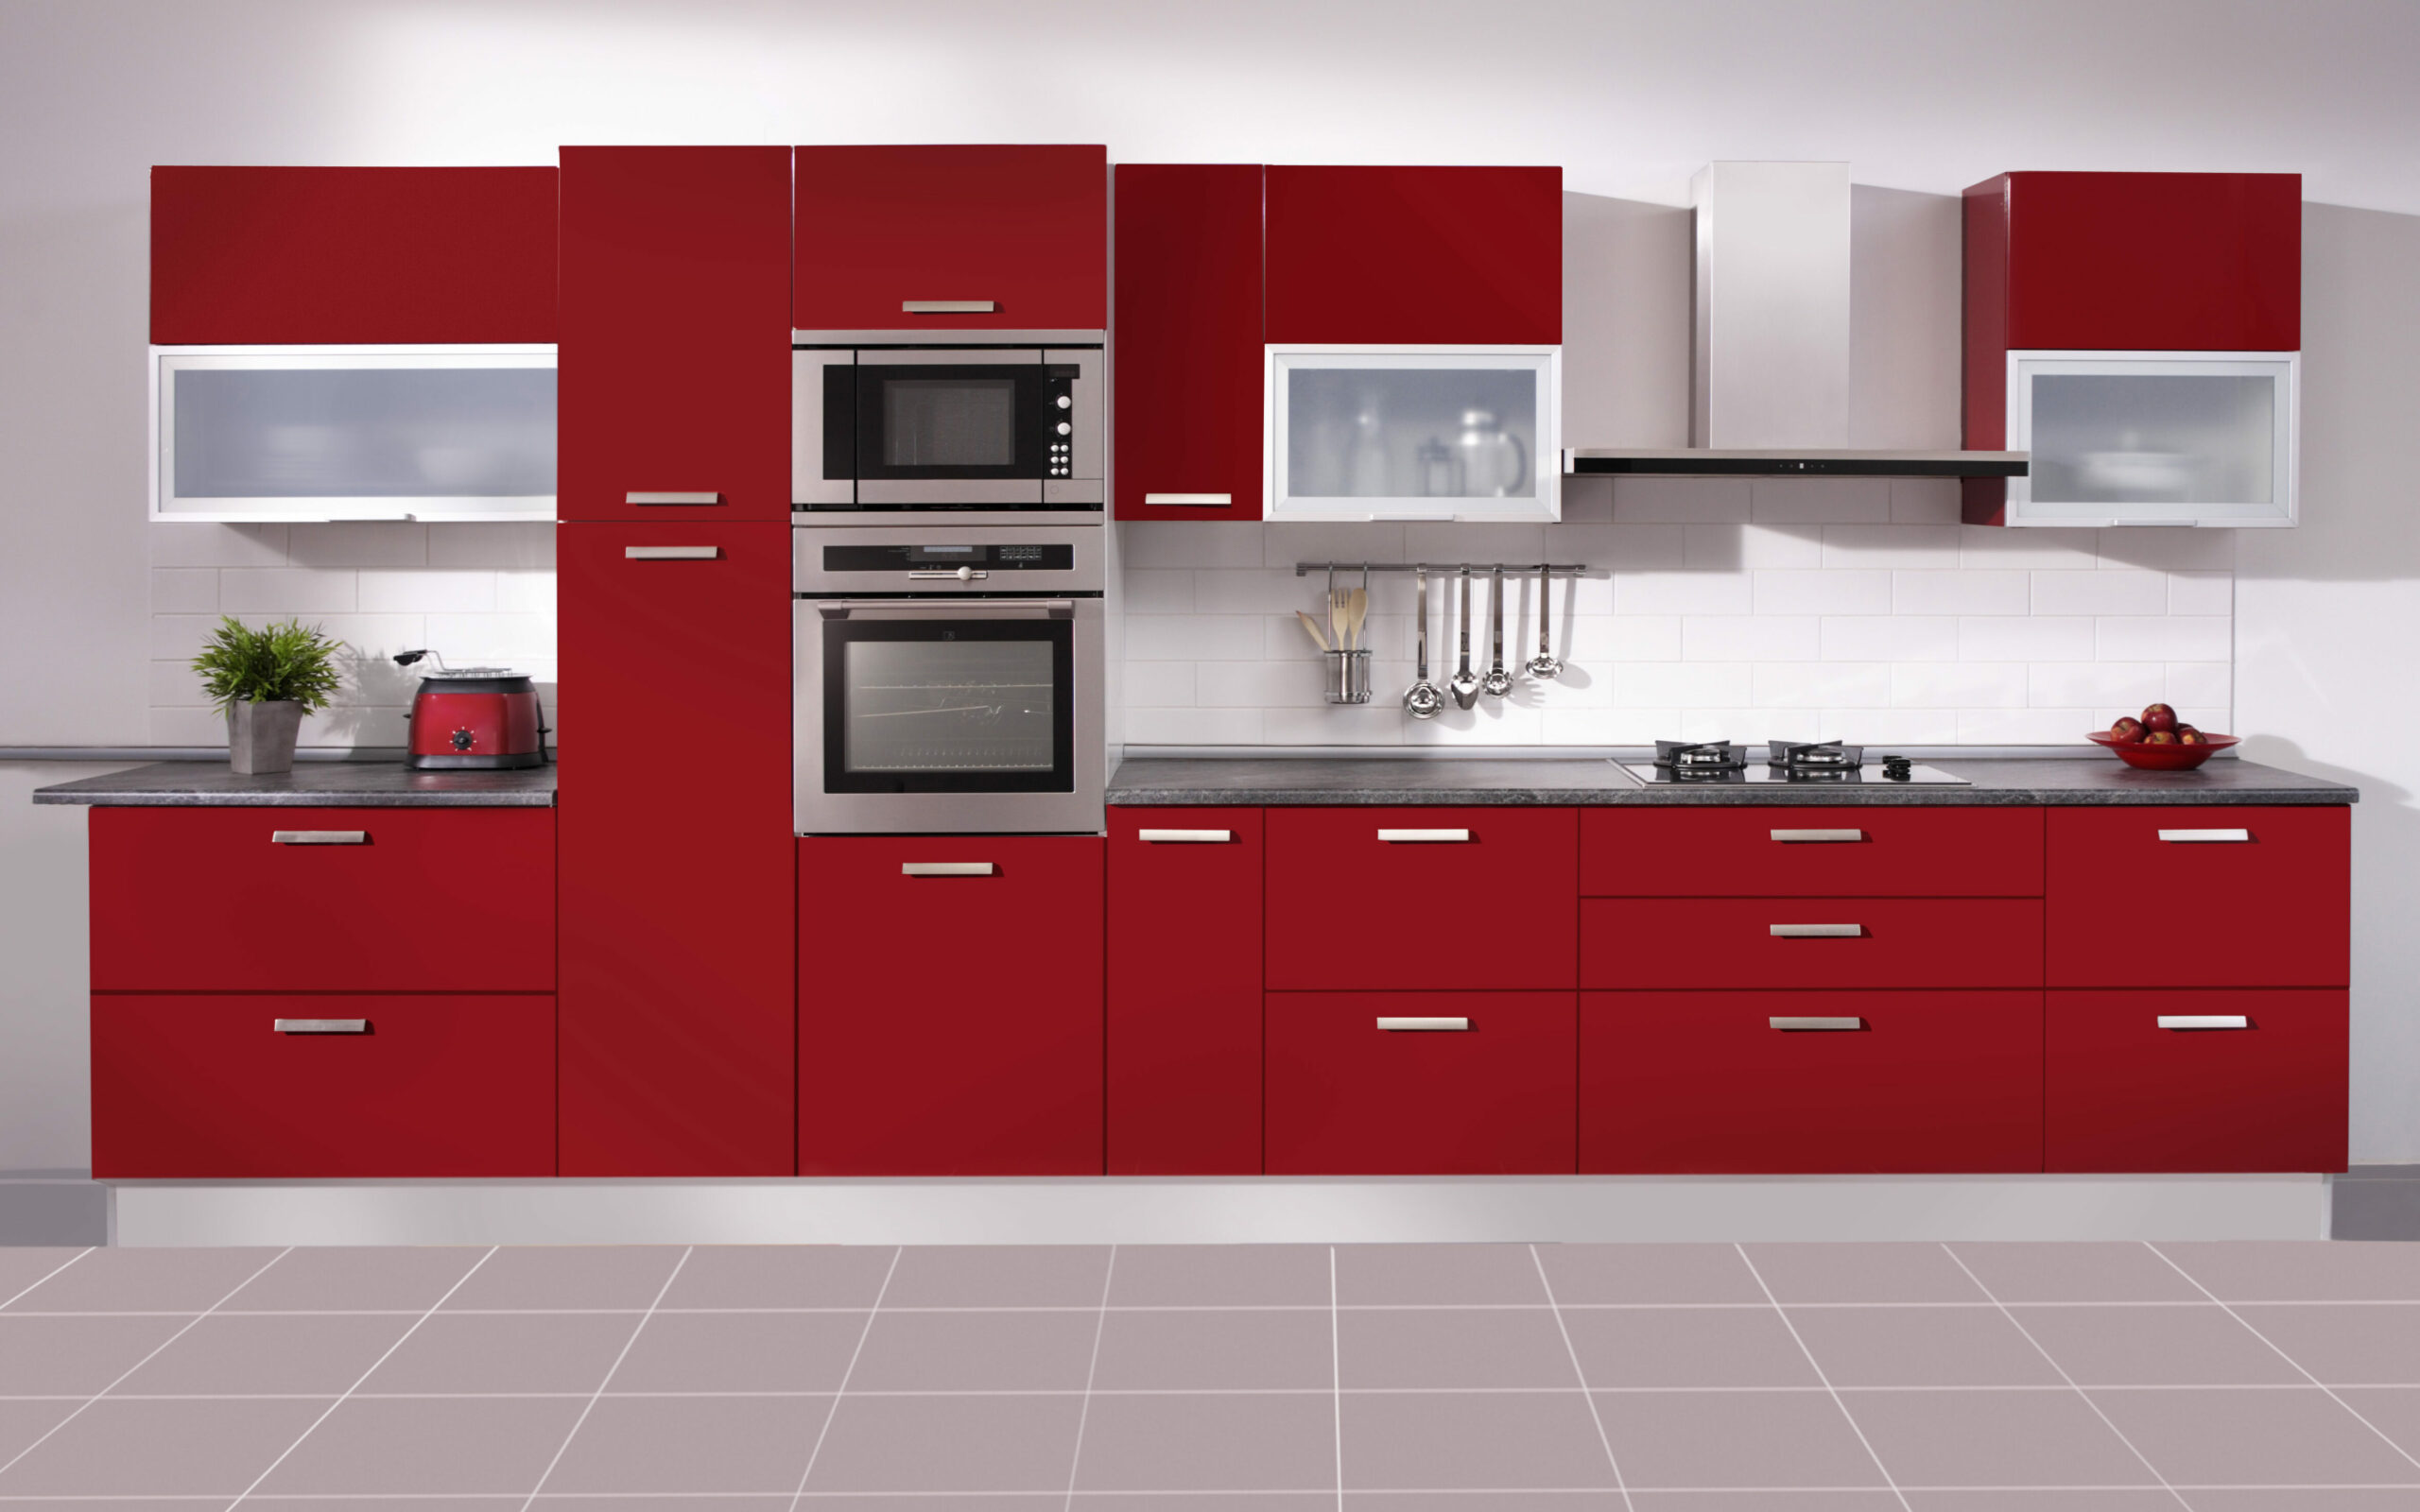 Stock image of a red kitchen